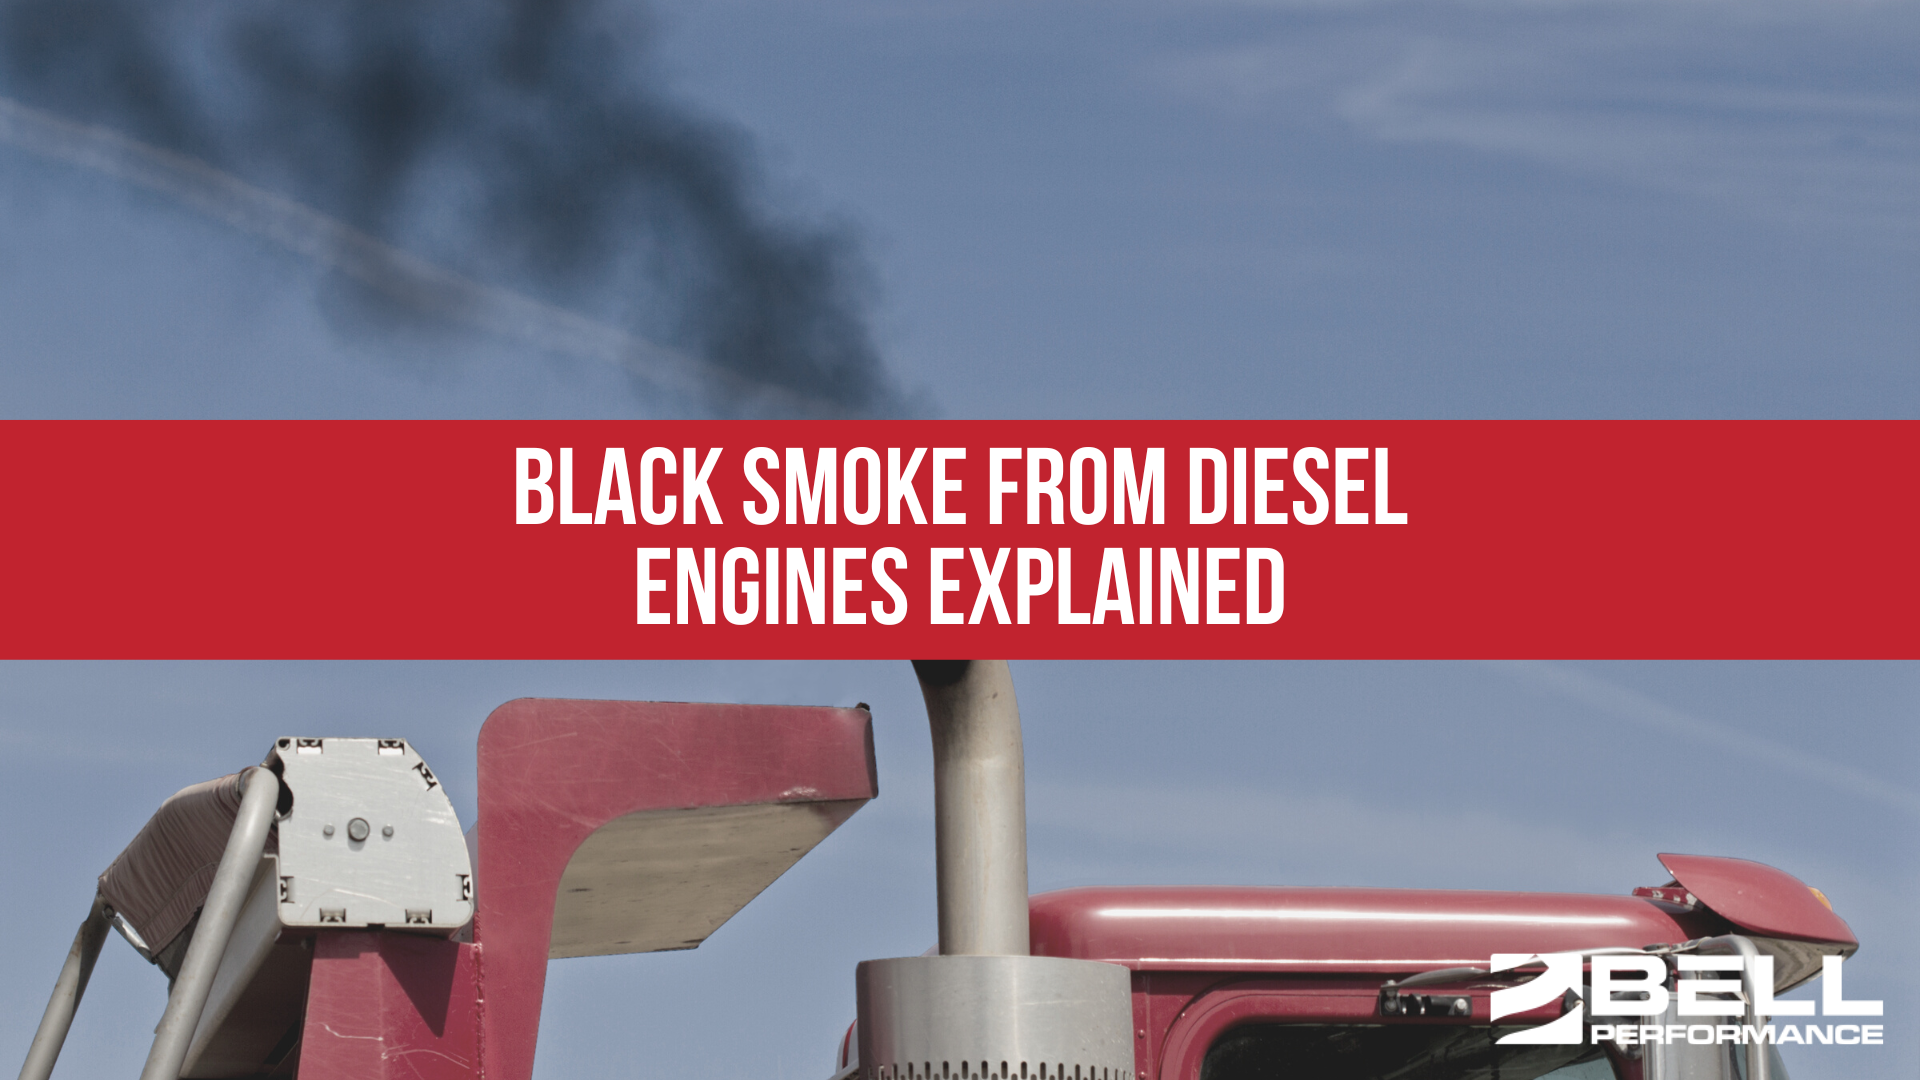 Diesel engines are more trouble than they're worth